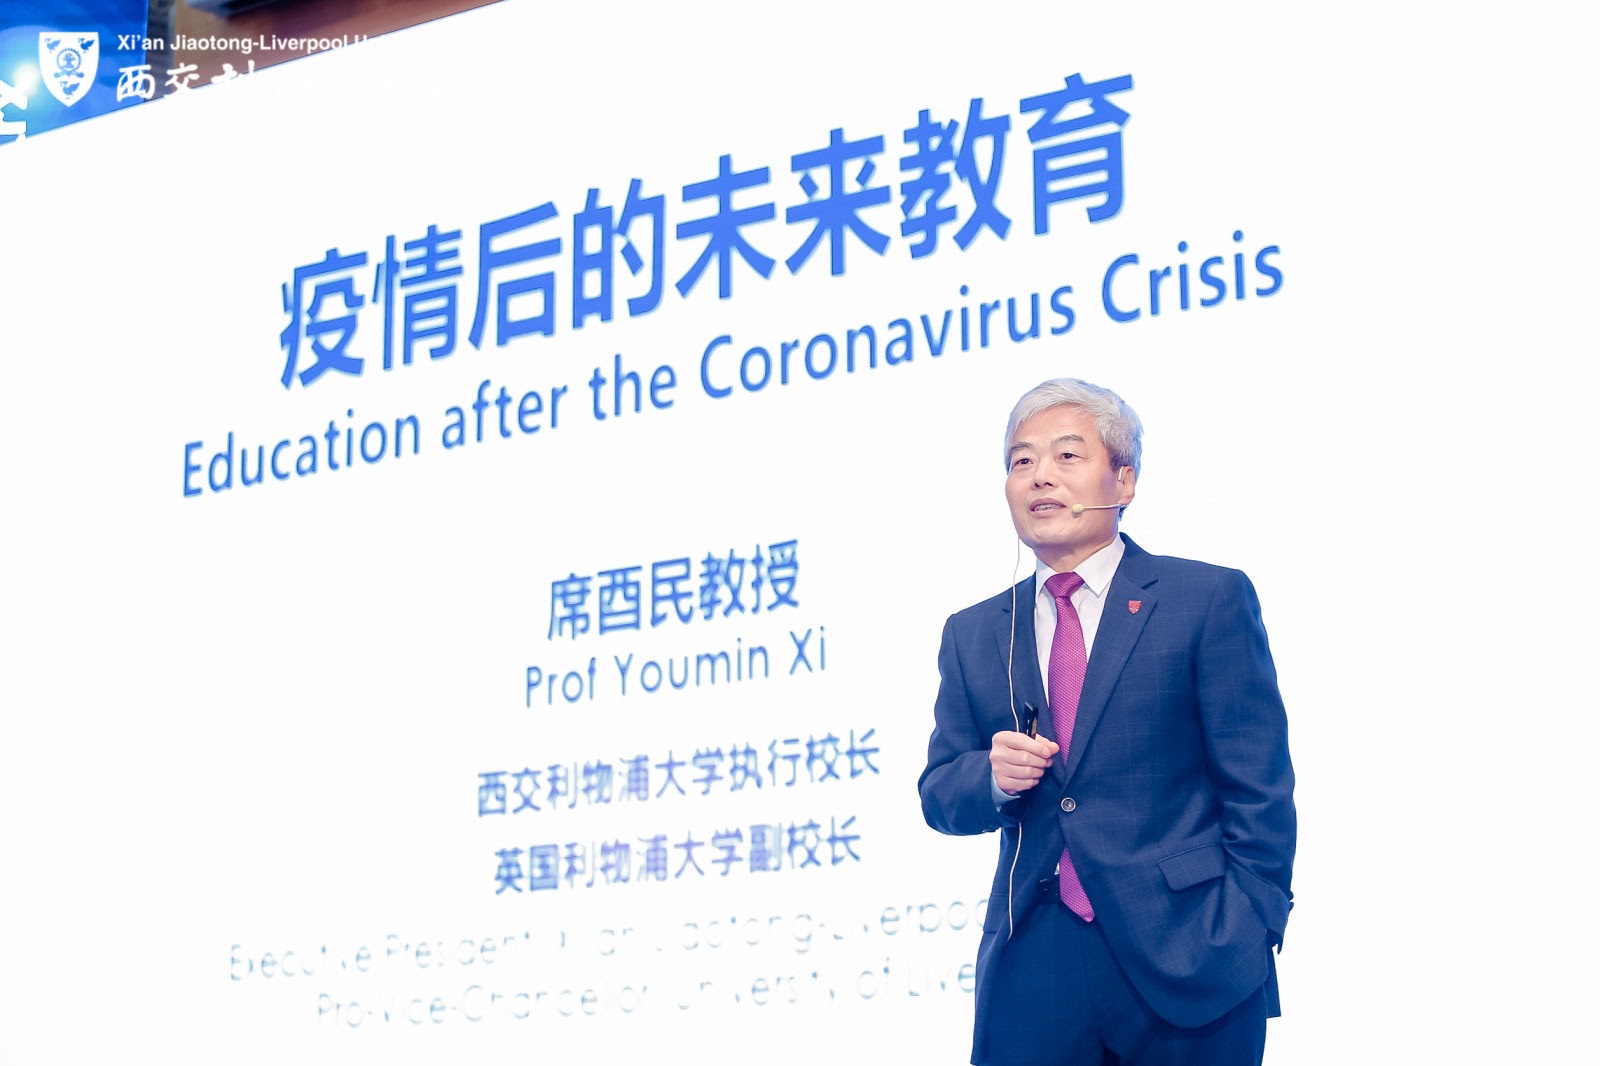 Professor Youmin Xi giving a speech about education after the coronavirus crisis